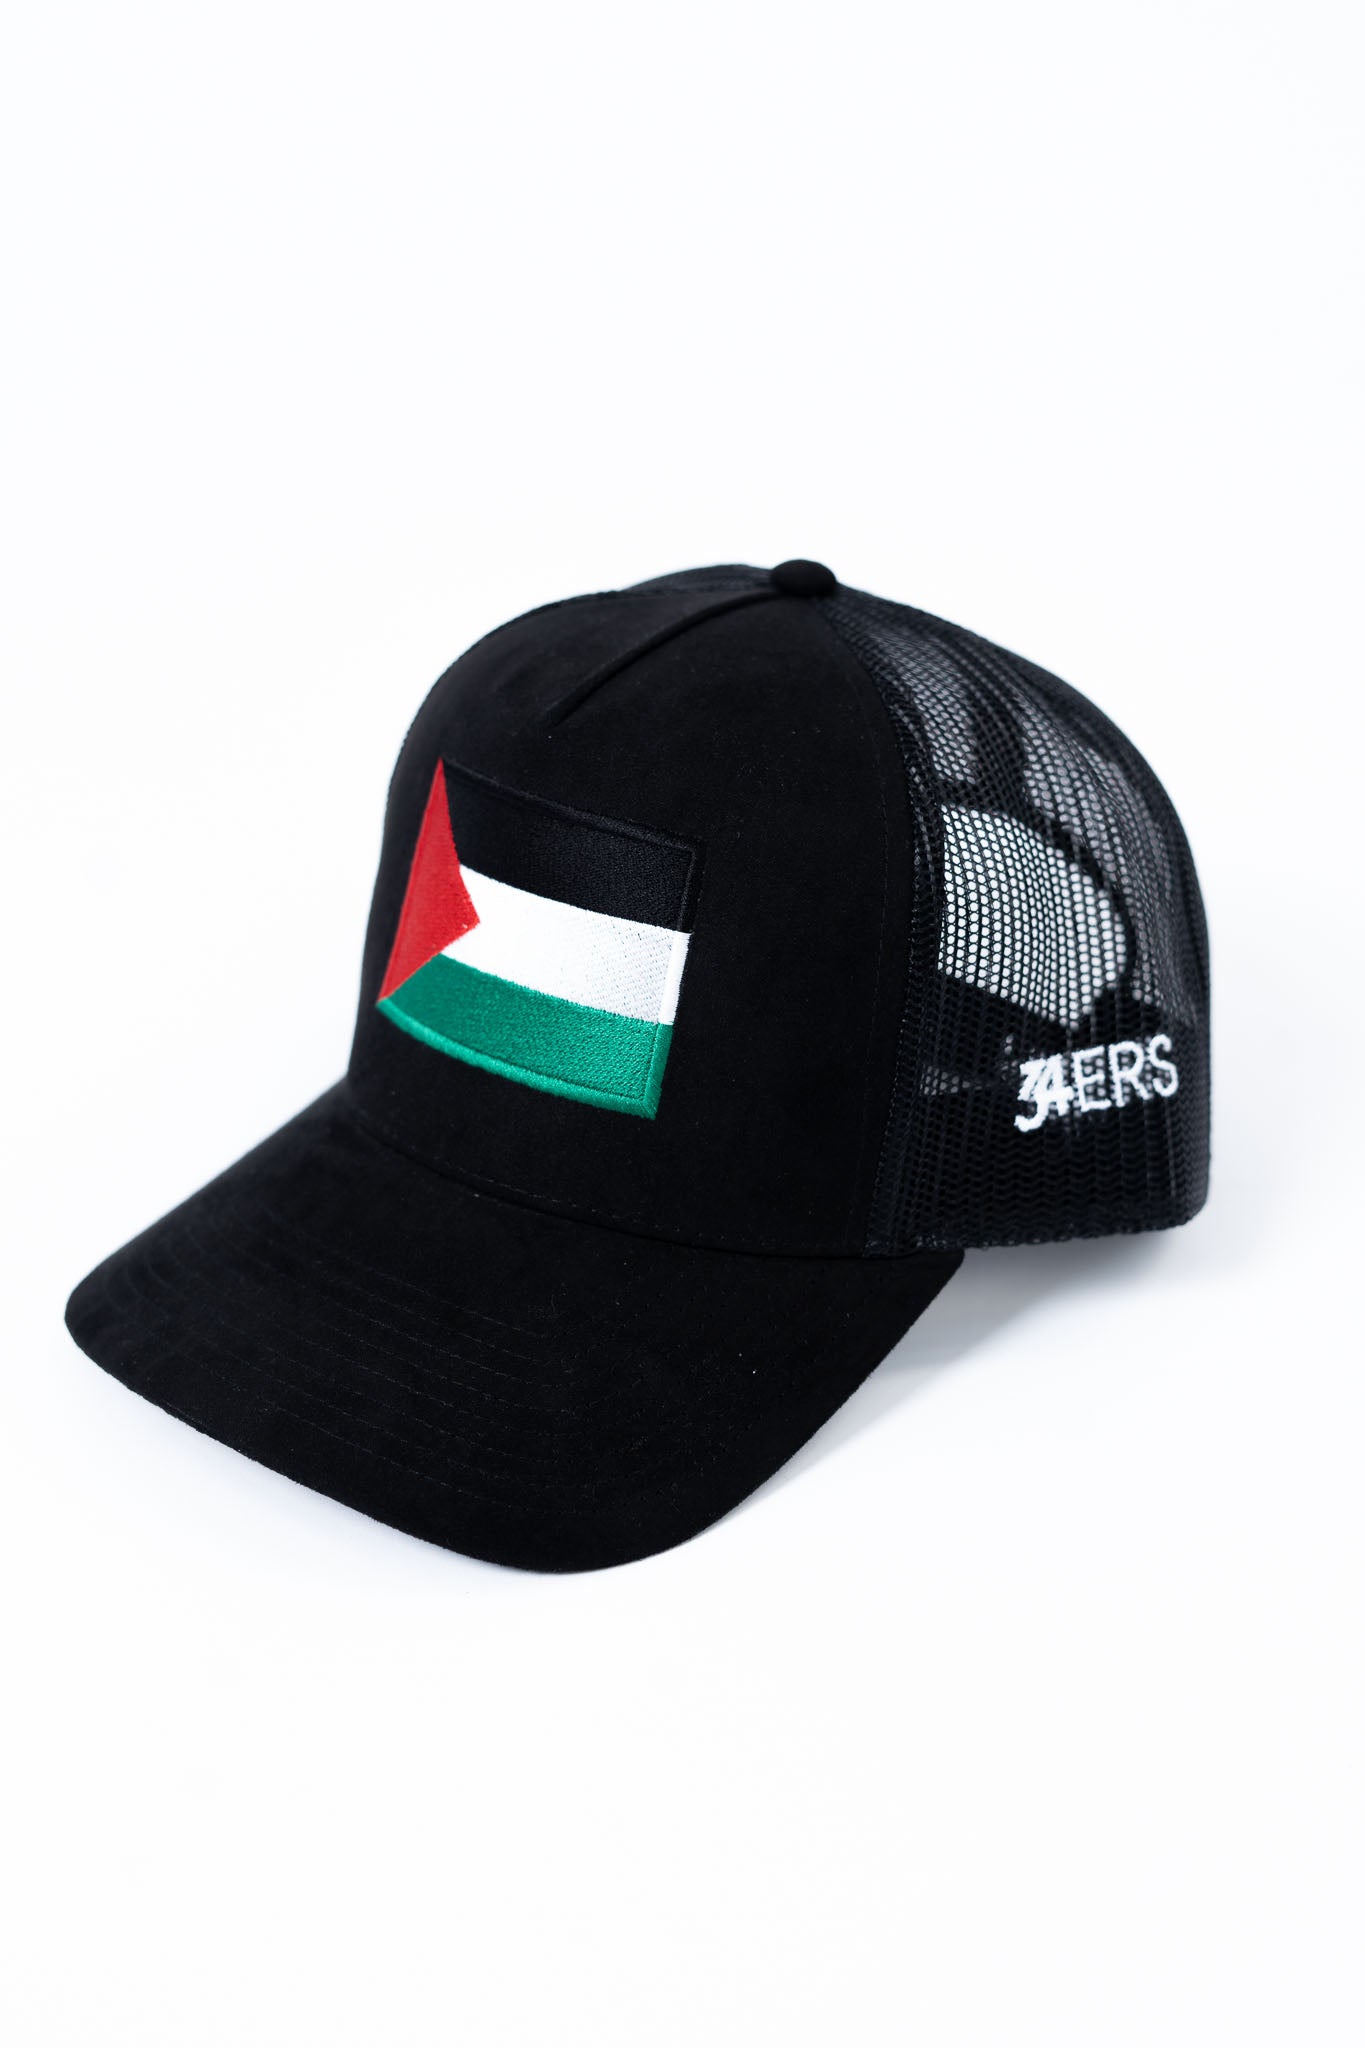 We Stand with Palestine - Black Suede/Mesh Caps